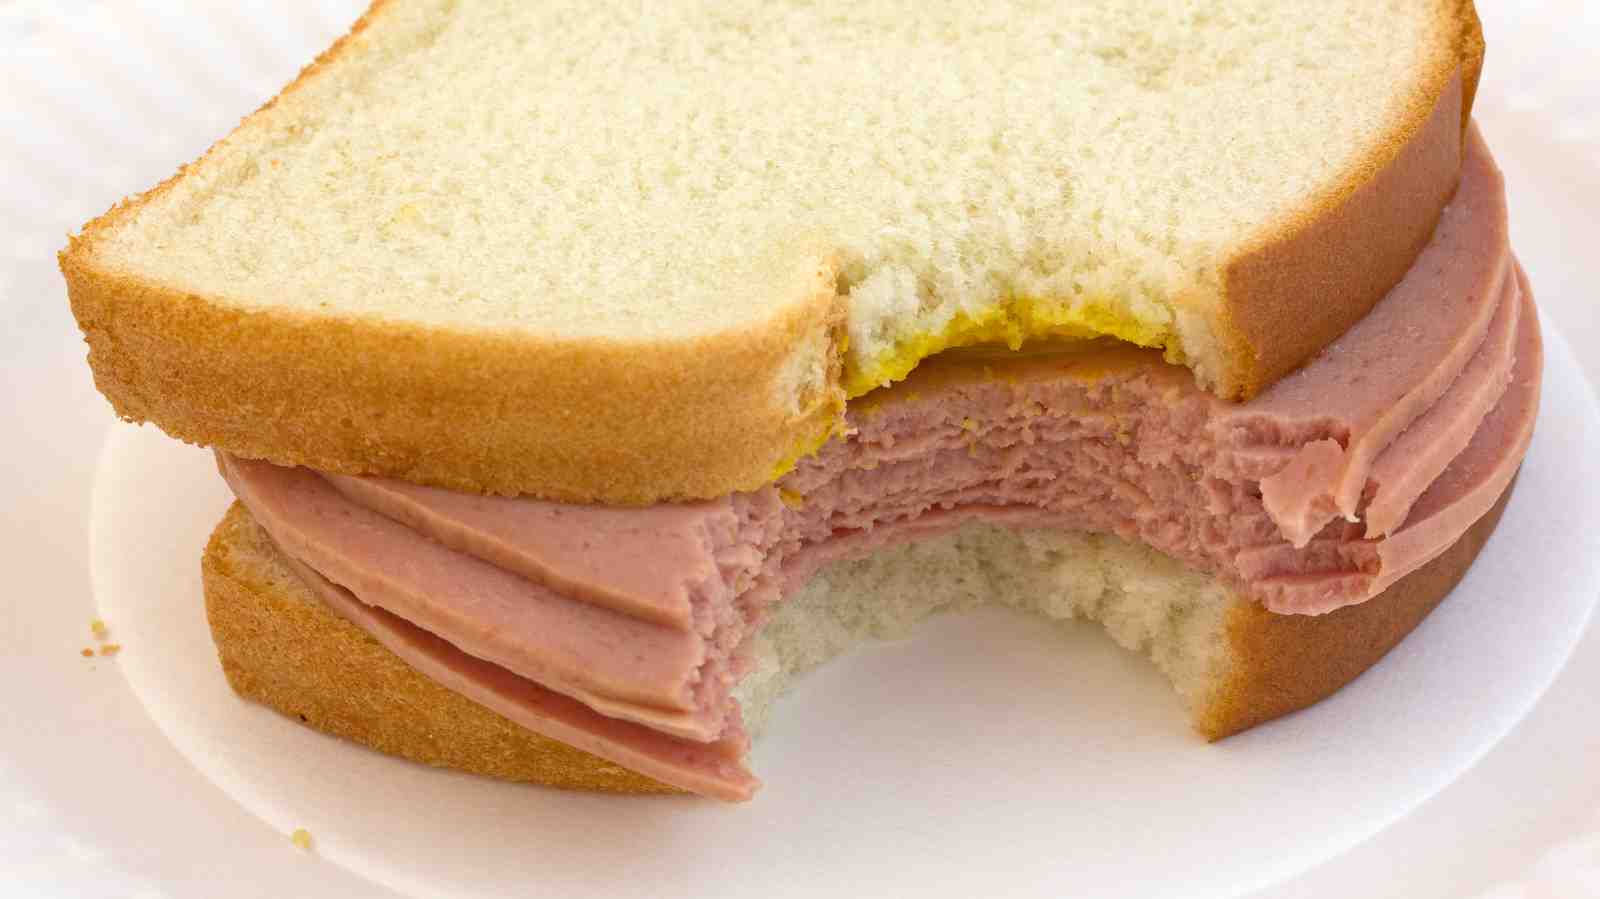 Are bologna and hot dogs the same?